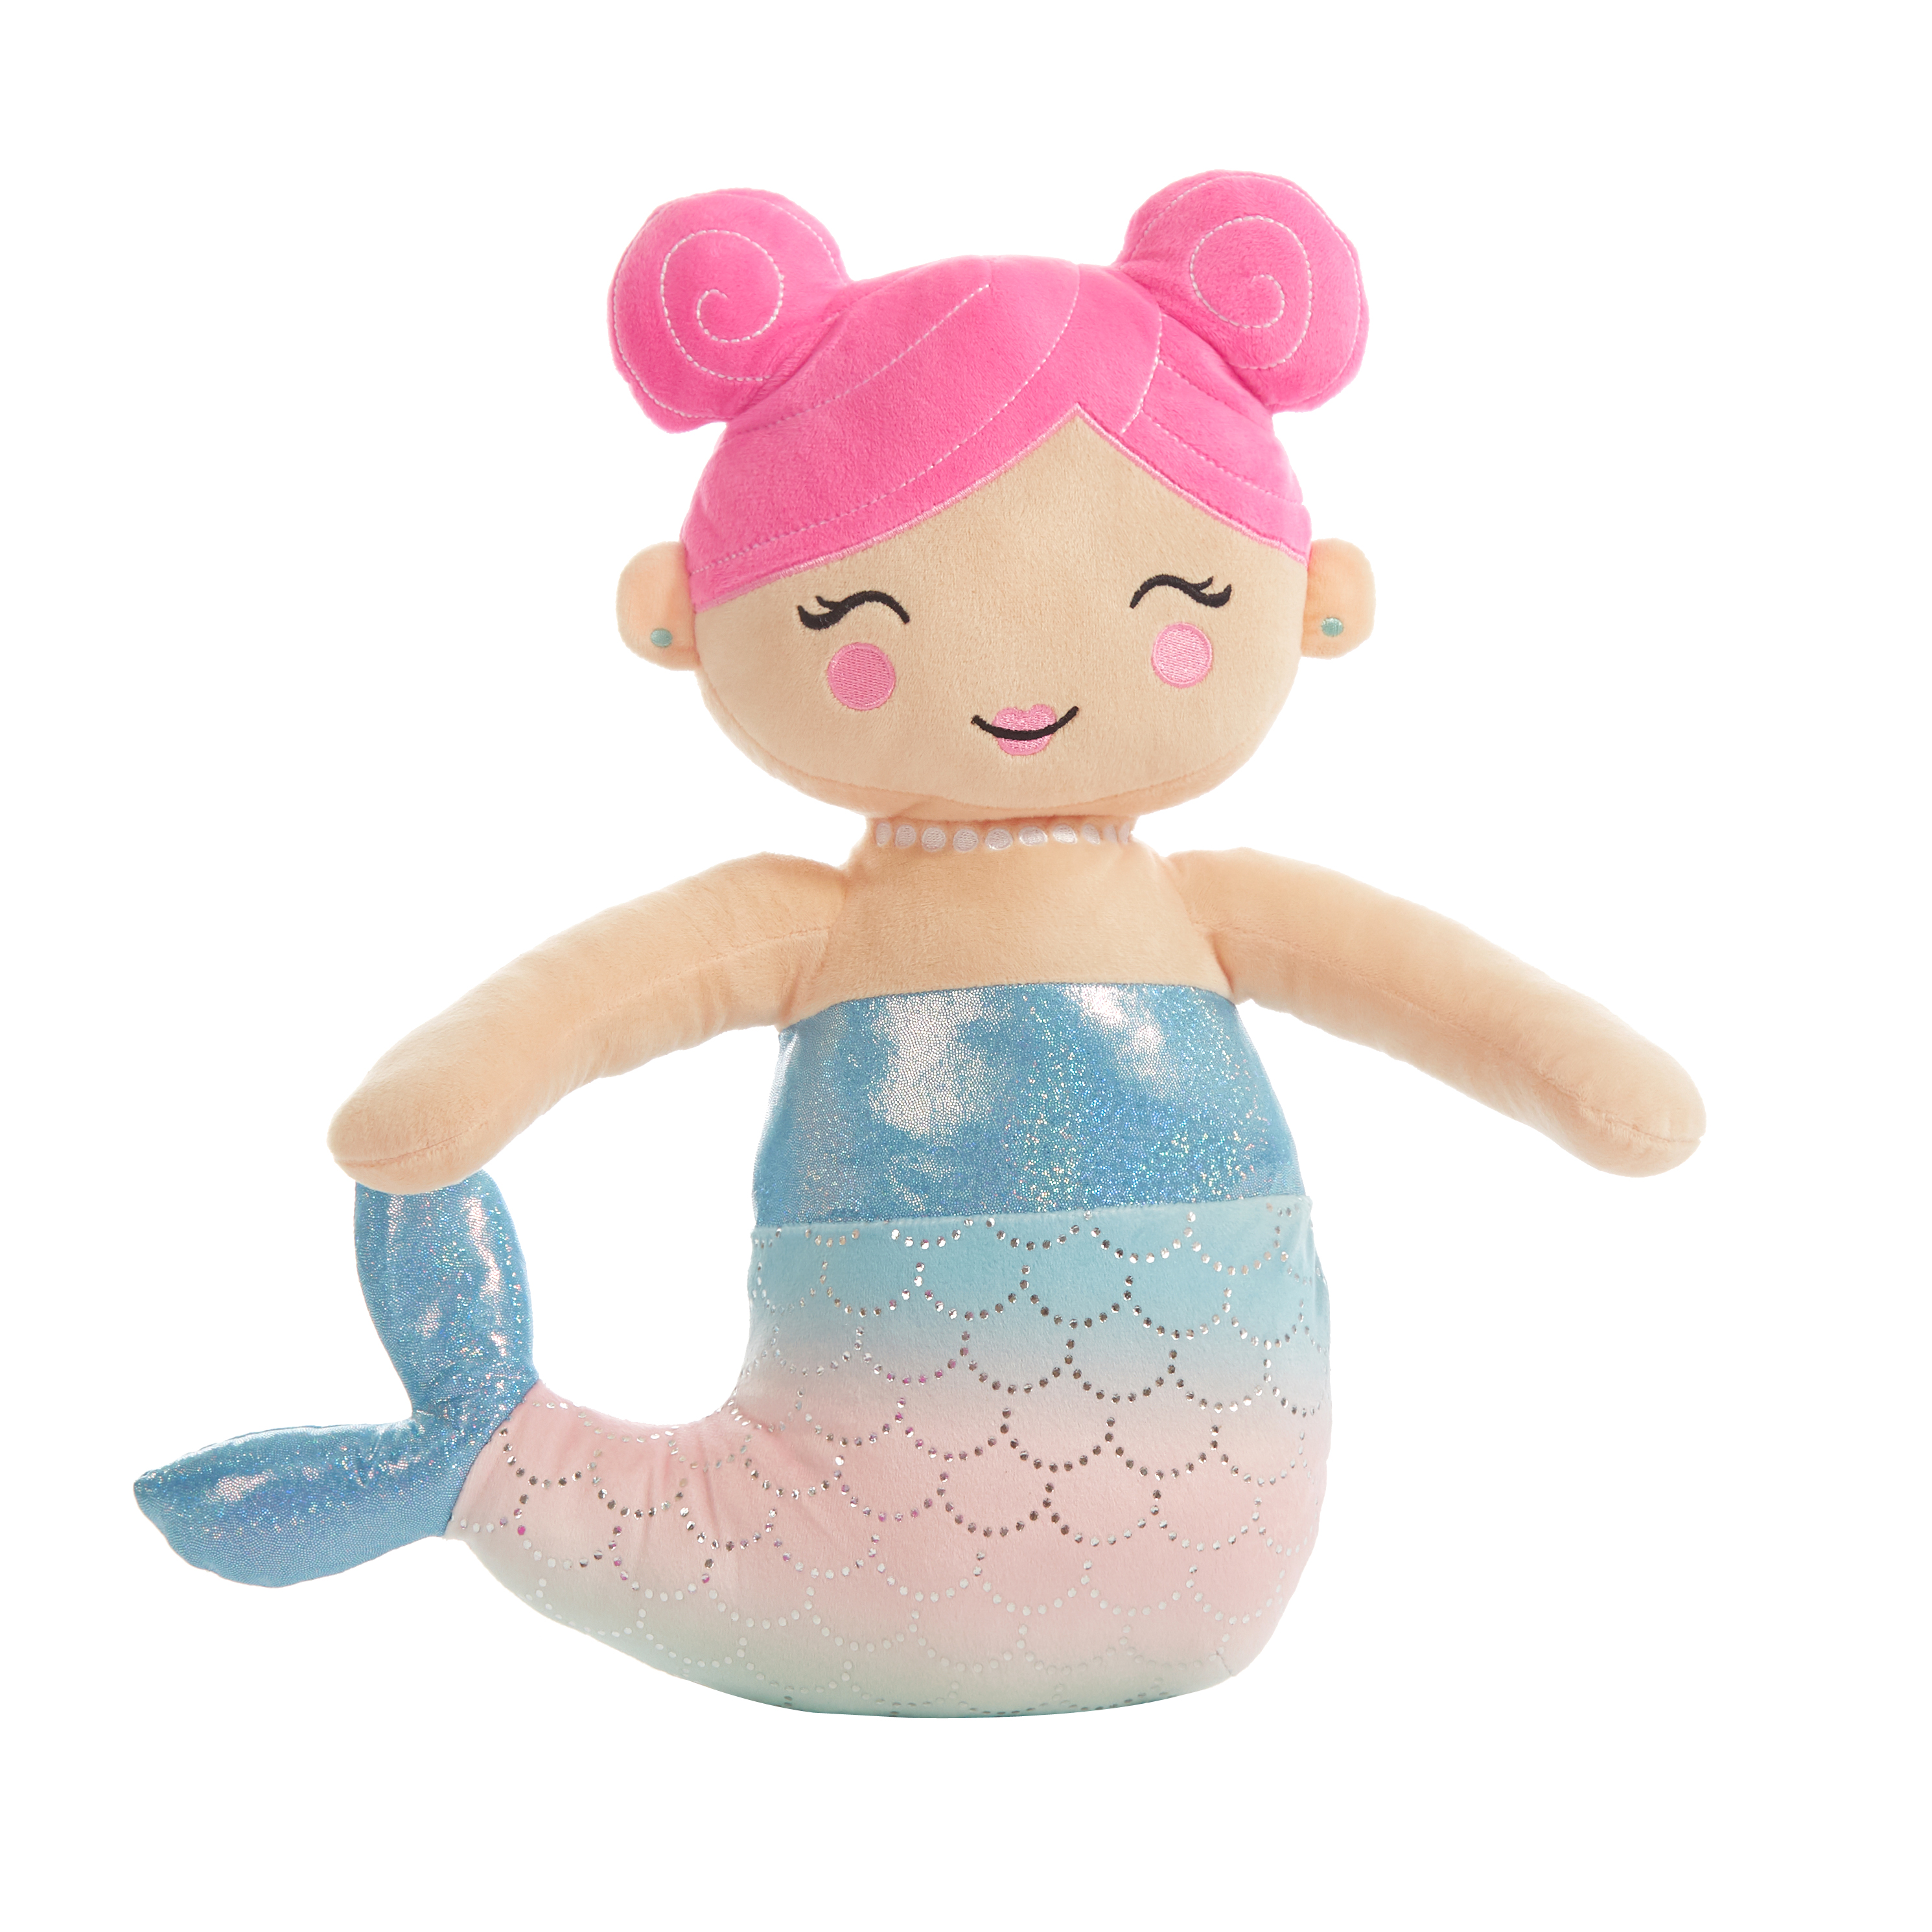 Your Zone Kids Figural Hugger and 50" x 60" Soft Plush Throw 2 Piece Set, Mermaid, Muti-Color - image 4 of 7